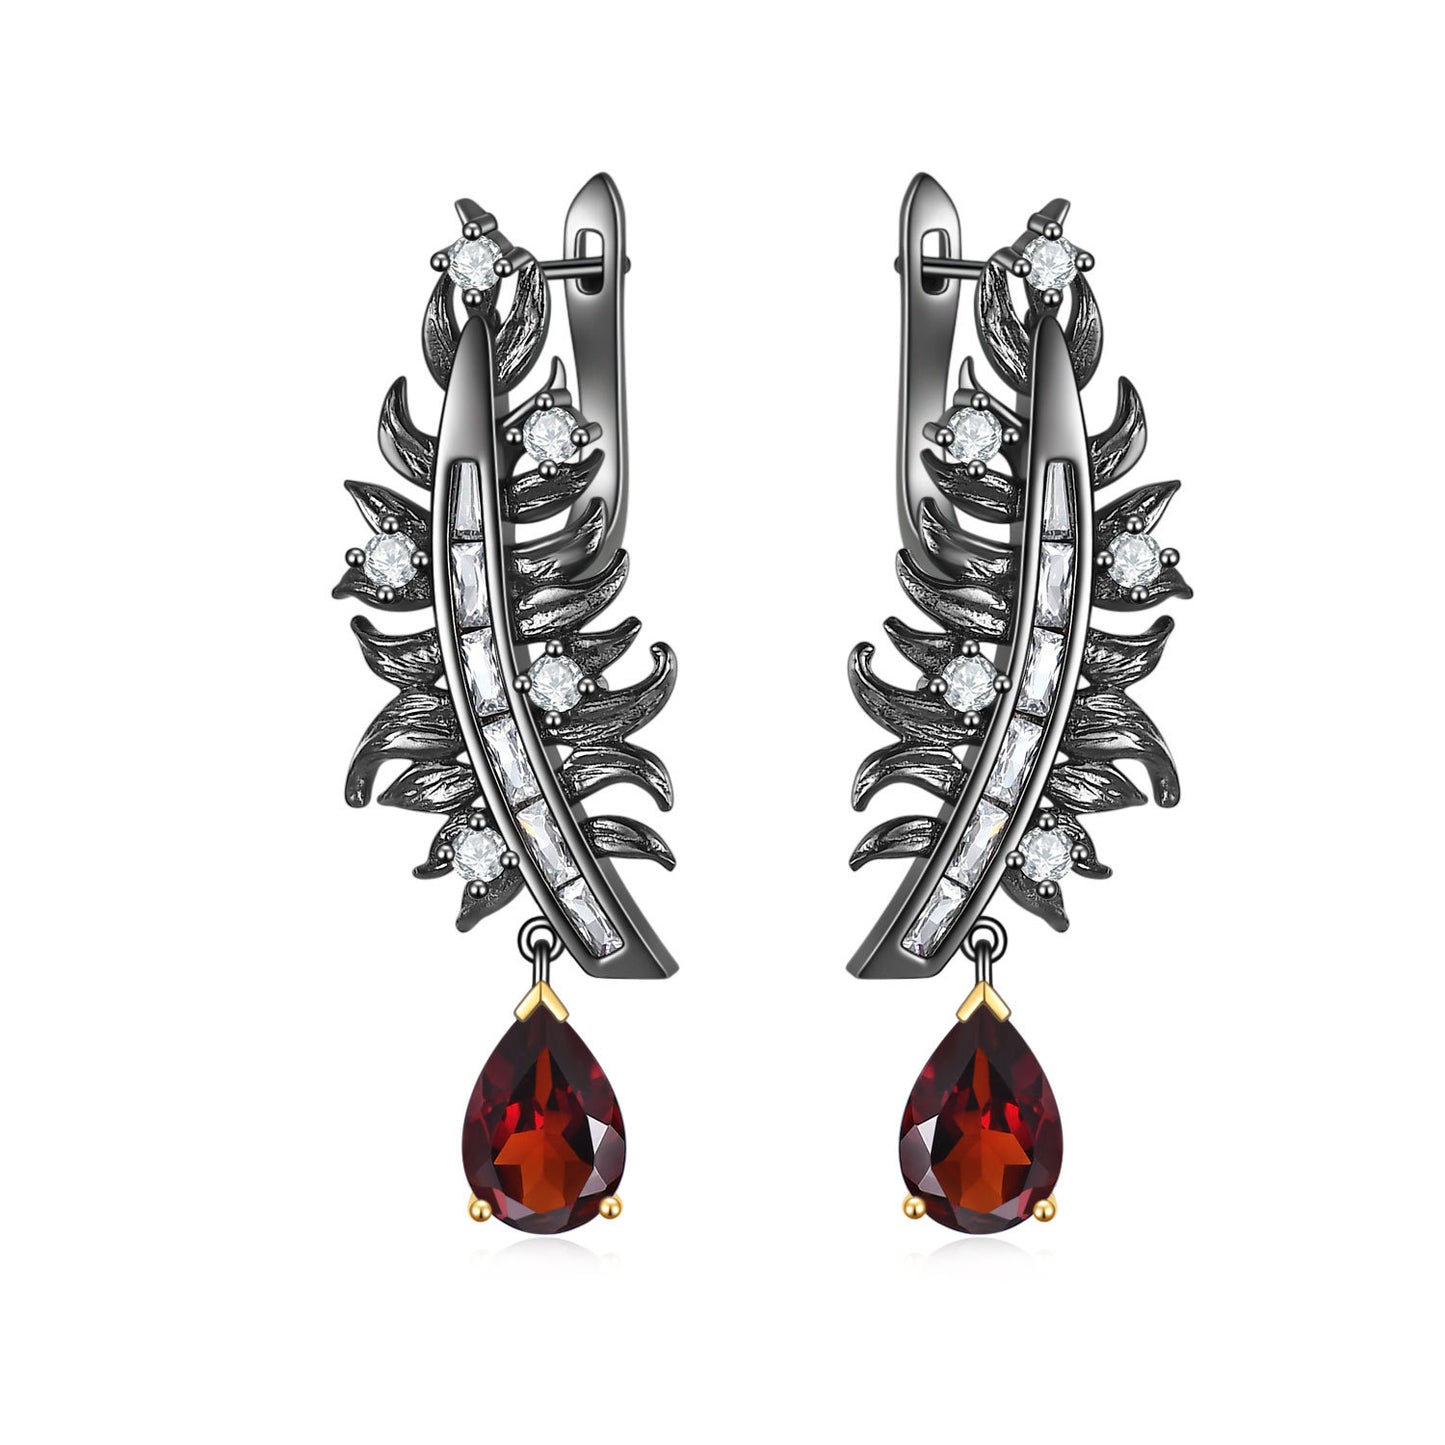 Italian Handmade Craft Inlaid Colourful Gemstone Feather Silver Drop Earrings for Women